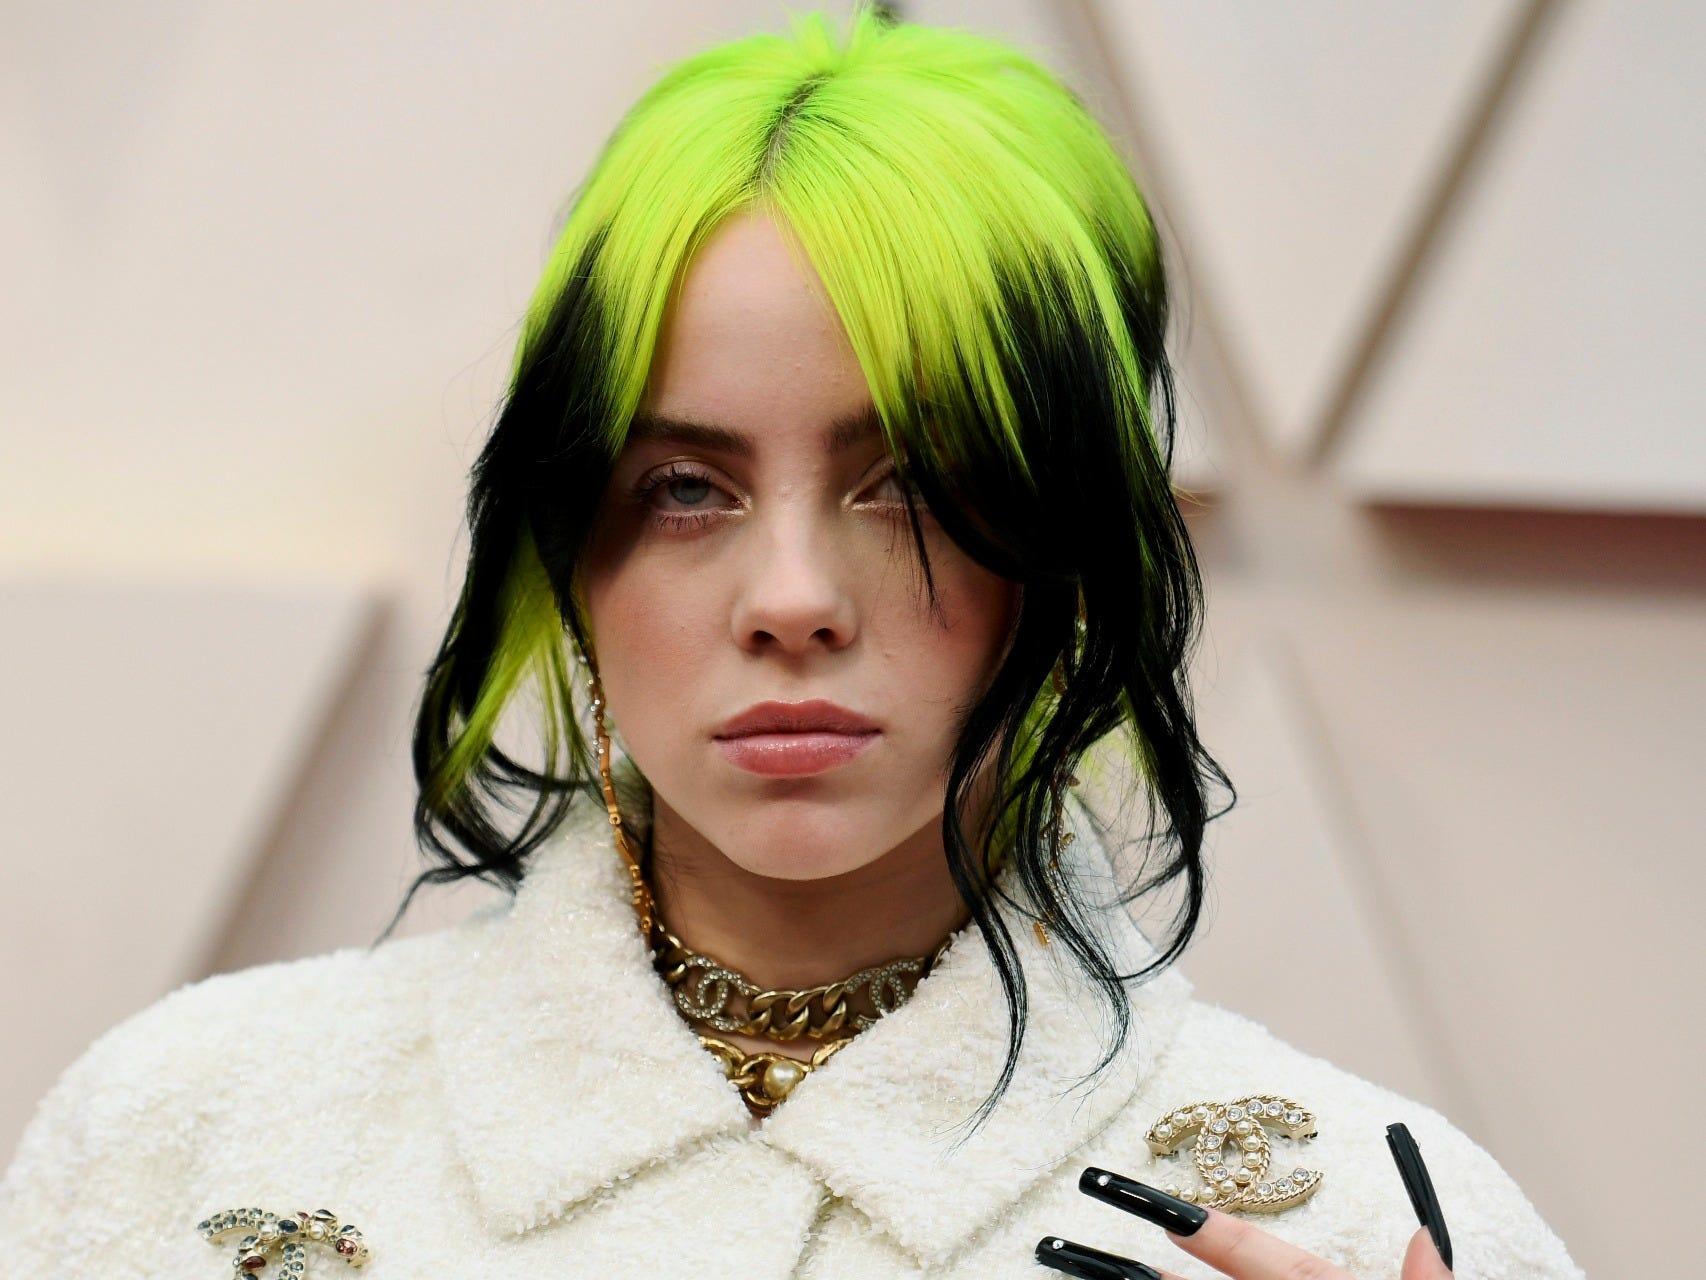 Billie Eilish Calls Out The Double Standard In Assigning Music